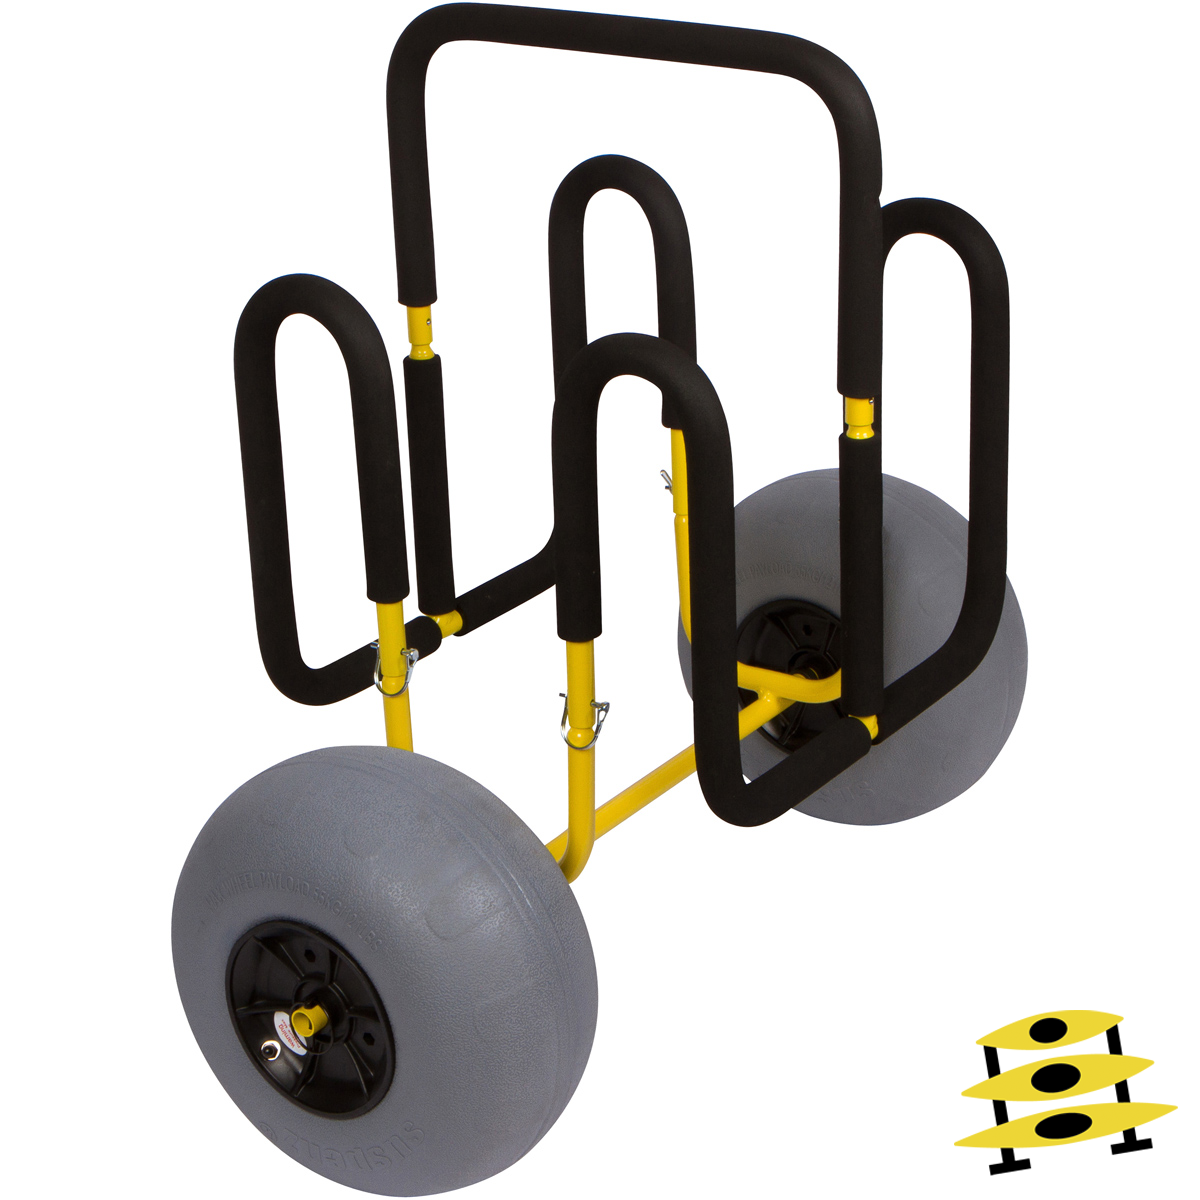 Cart for two Stand-up Paddleboards with balloon wheels